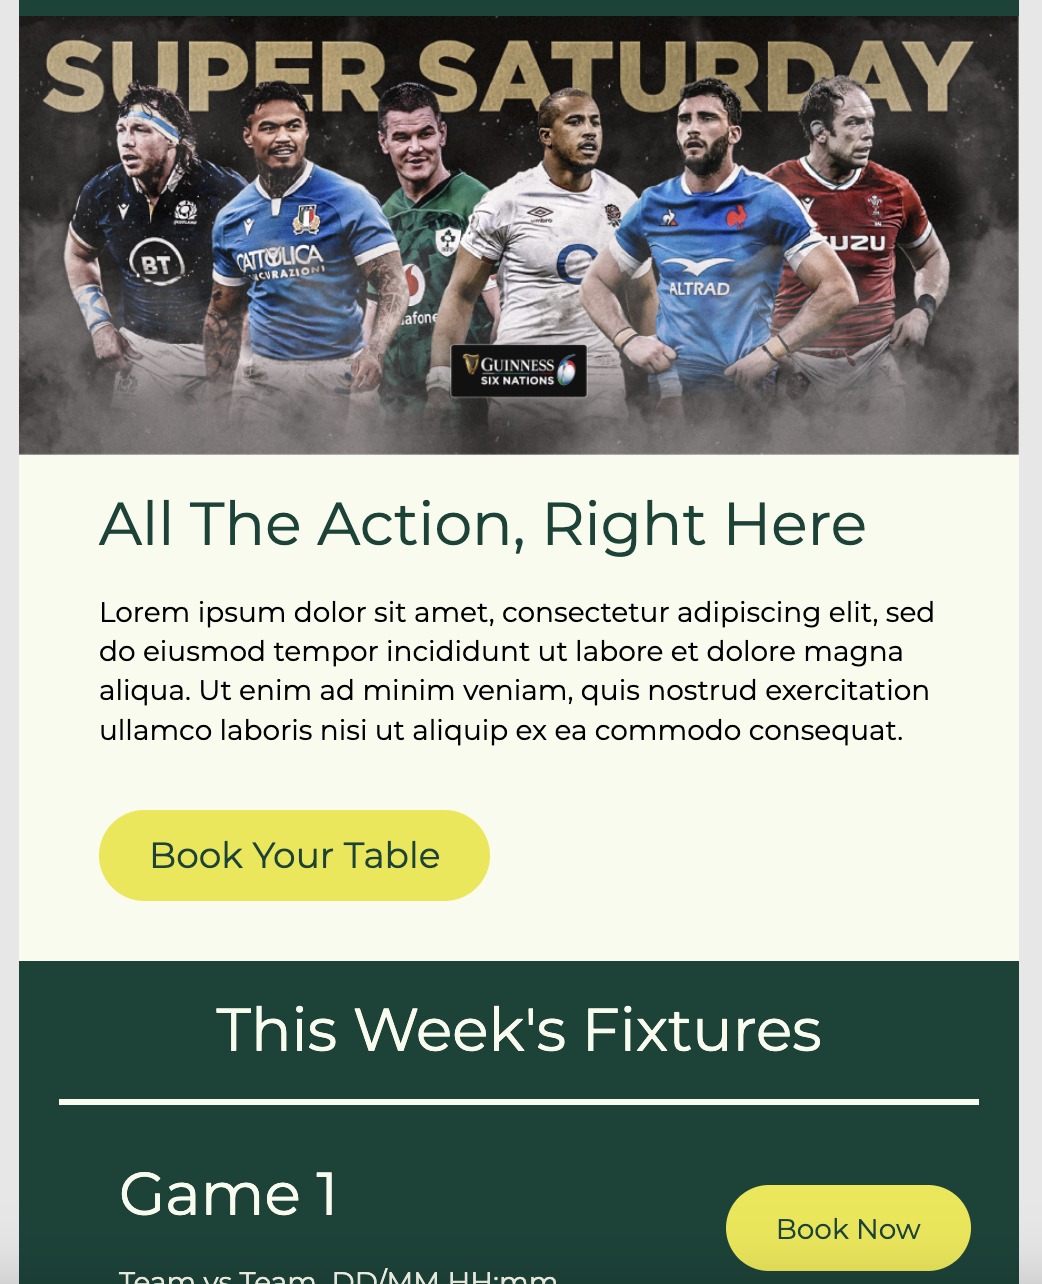 Sports Fixture HTML Email Template